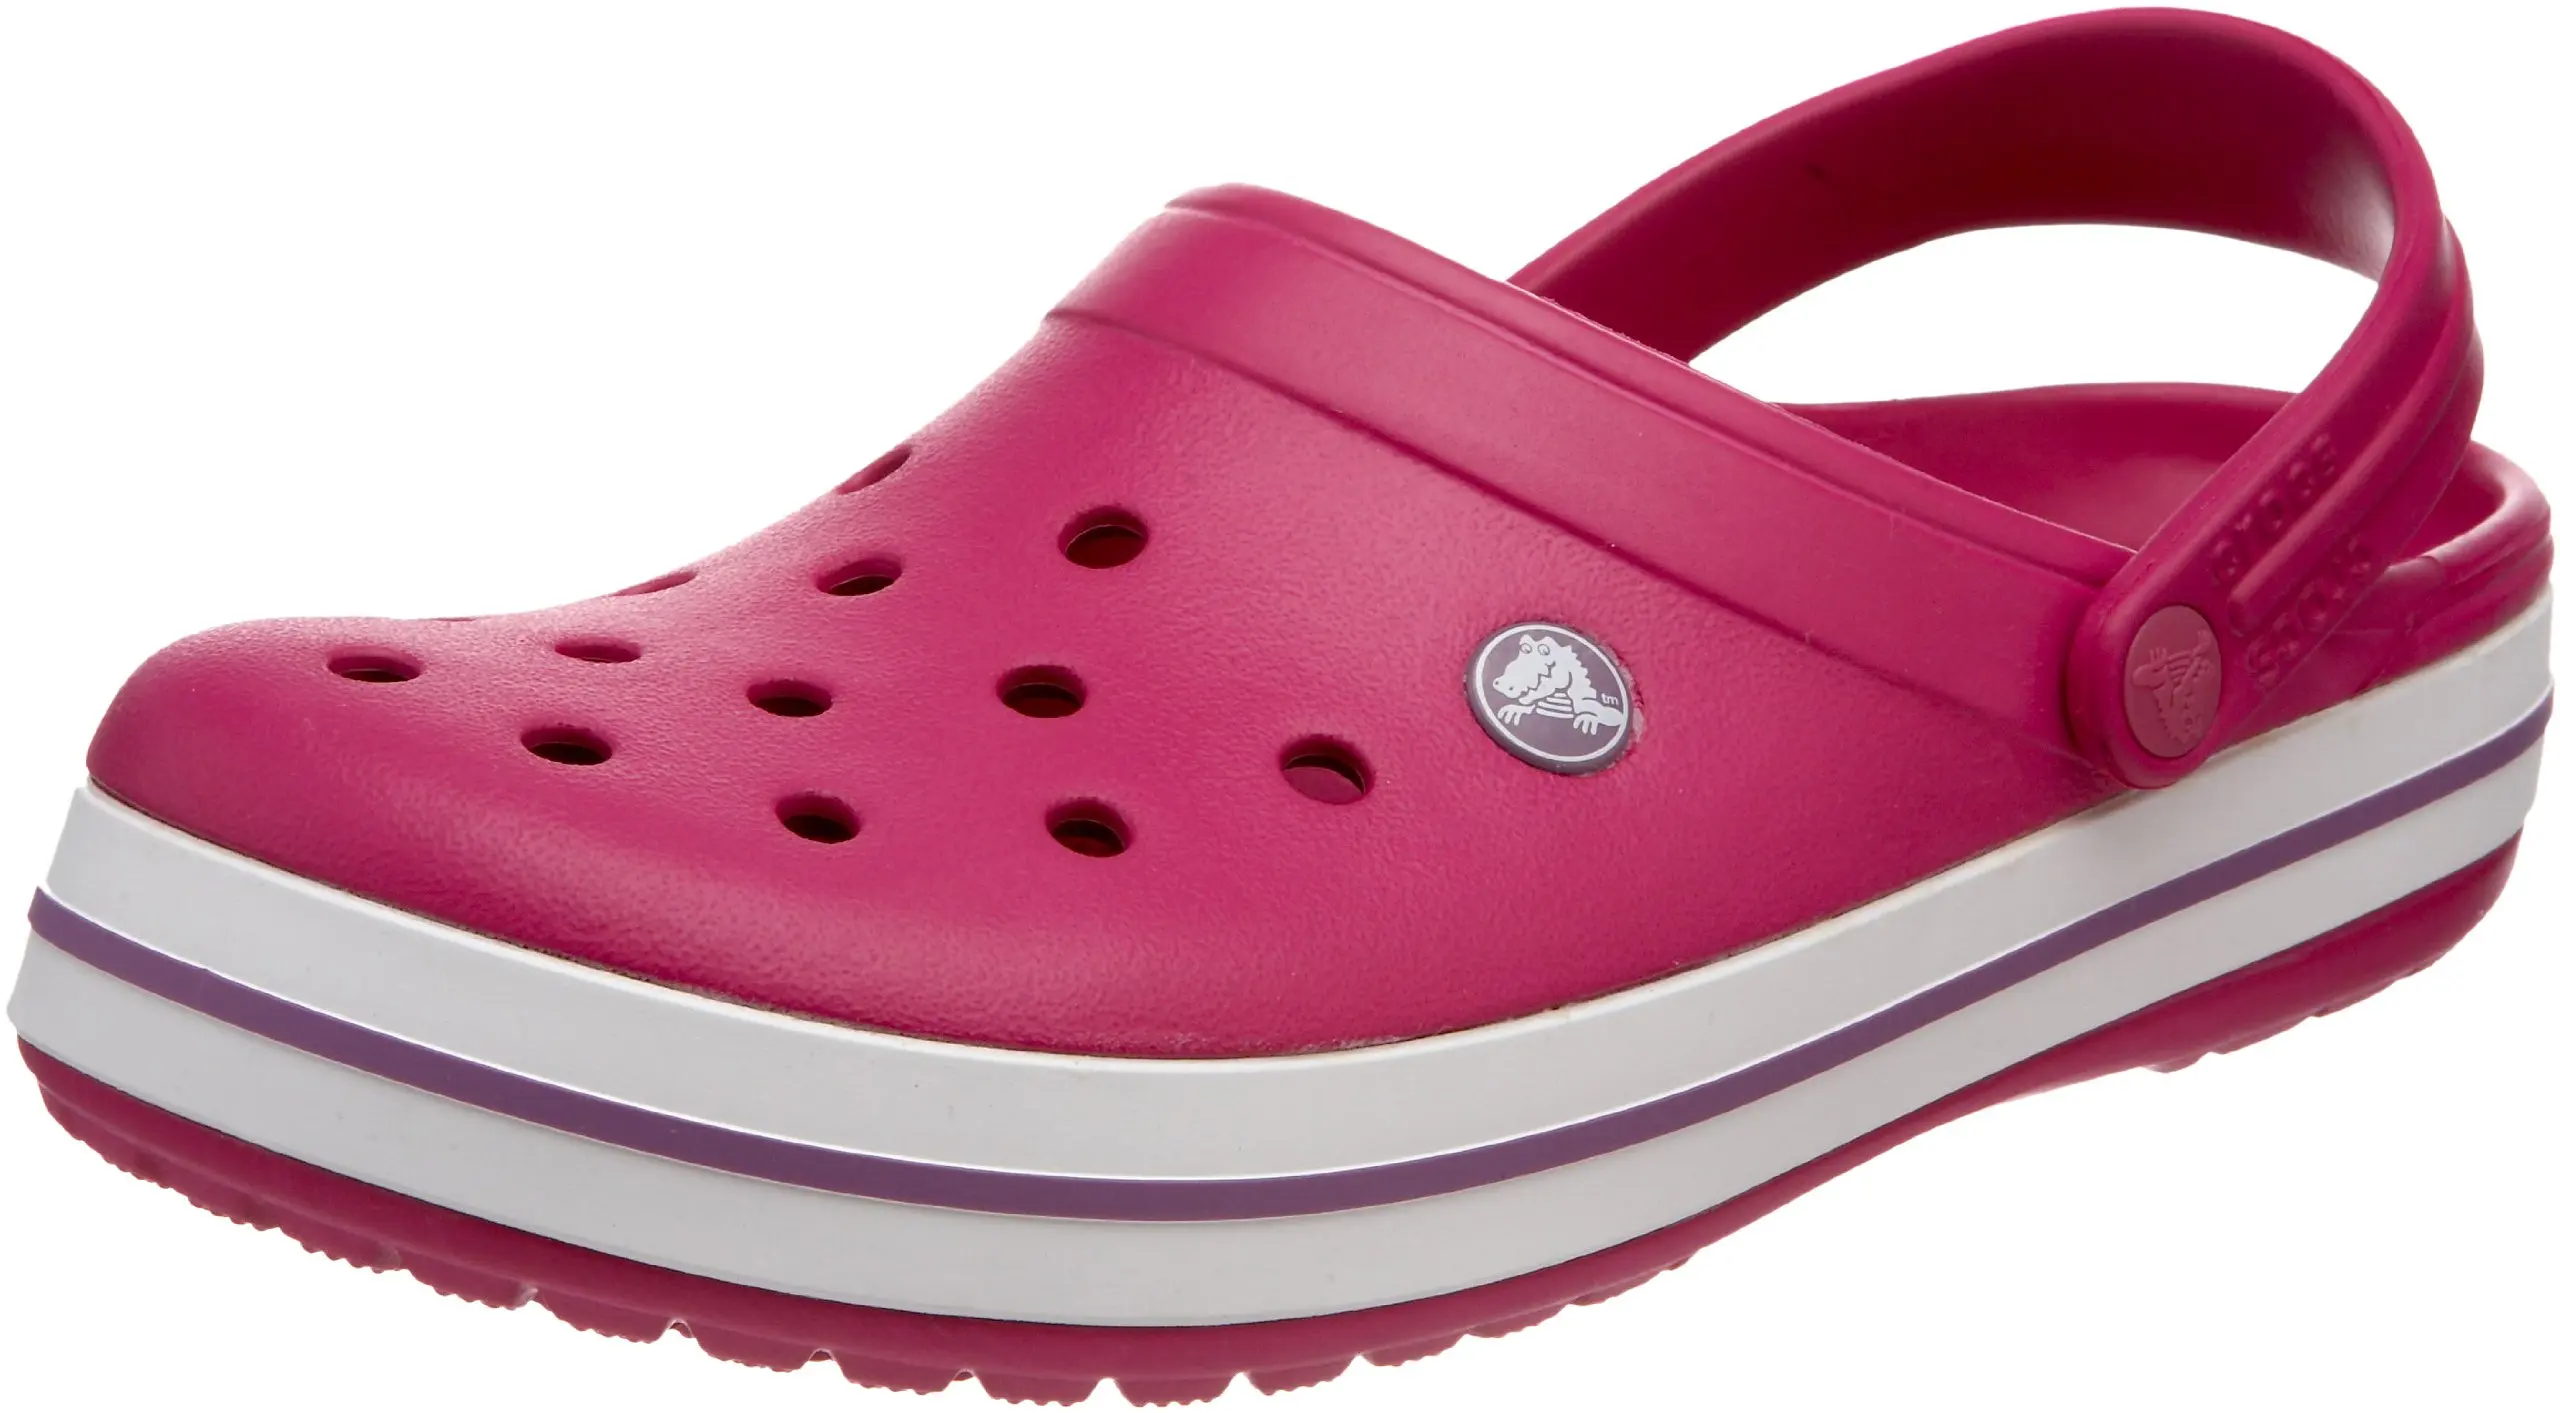 where can i get crocs for cheap